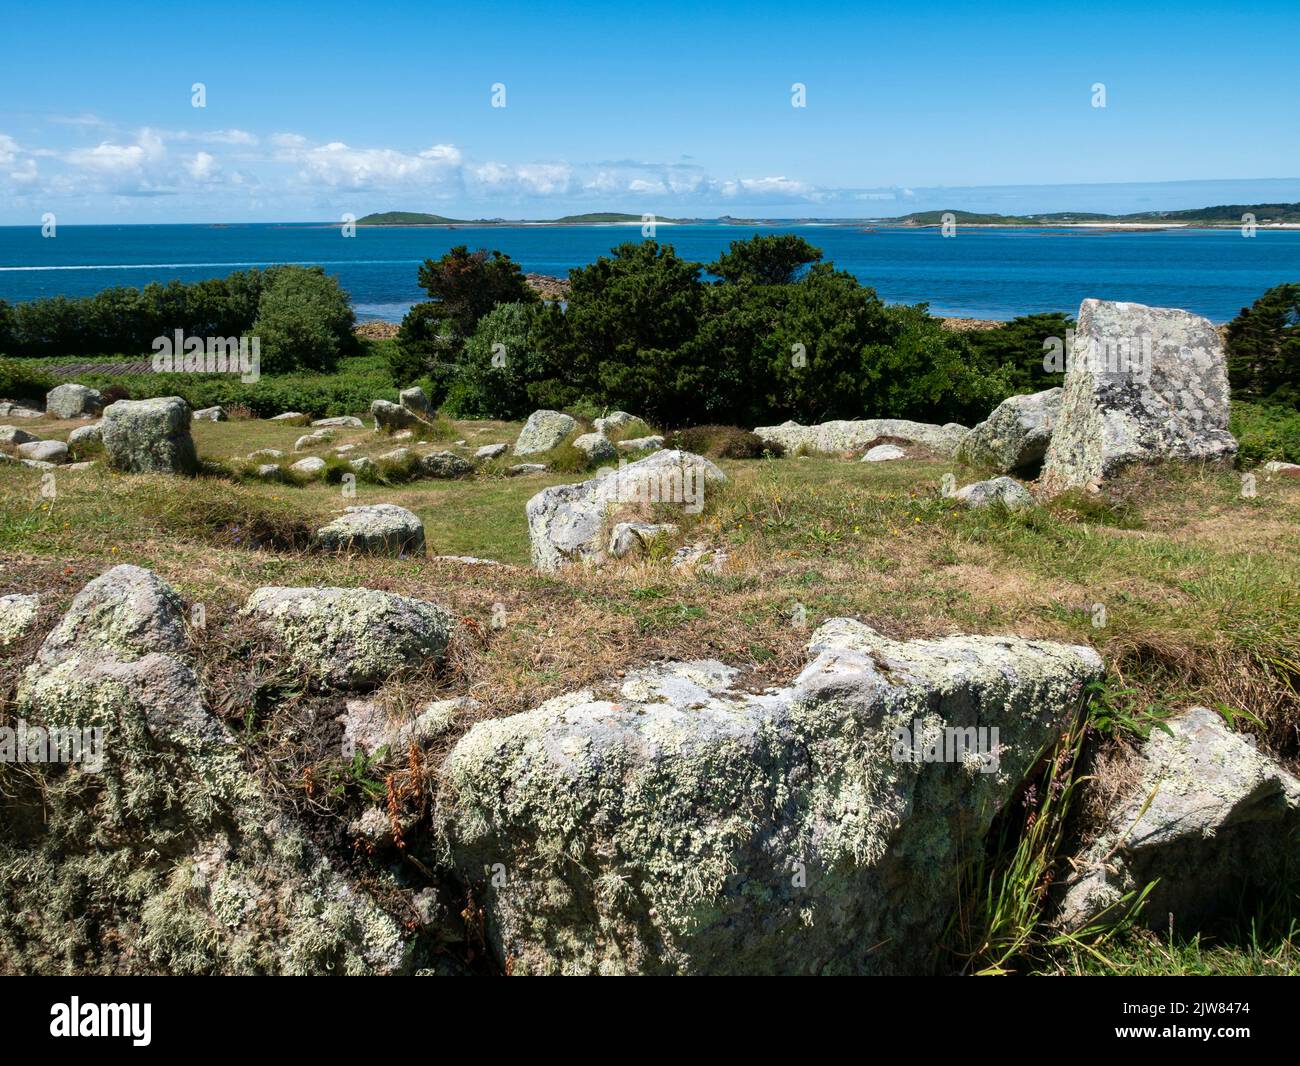 Halangy Down Ancient Village, St Mary's, Isles of Scilly, Cornwall, England, UK. Stock Photo